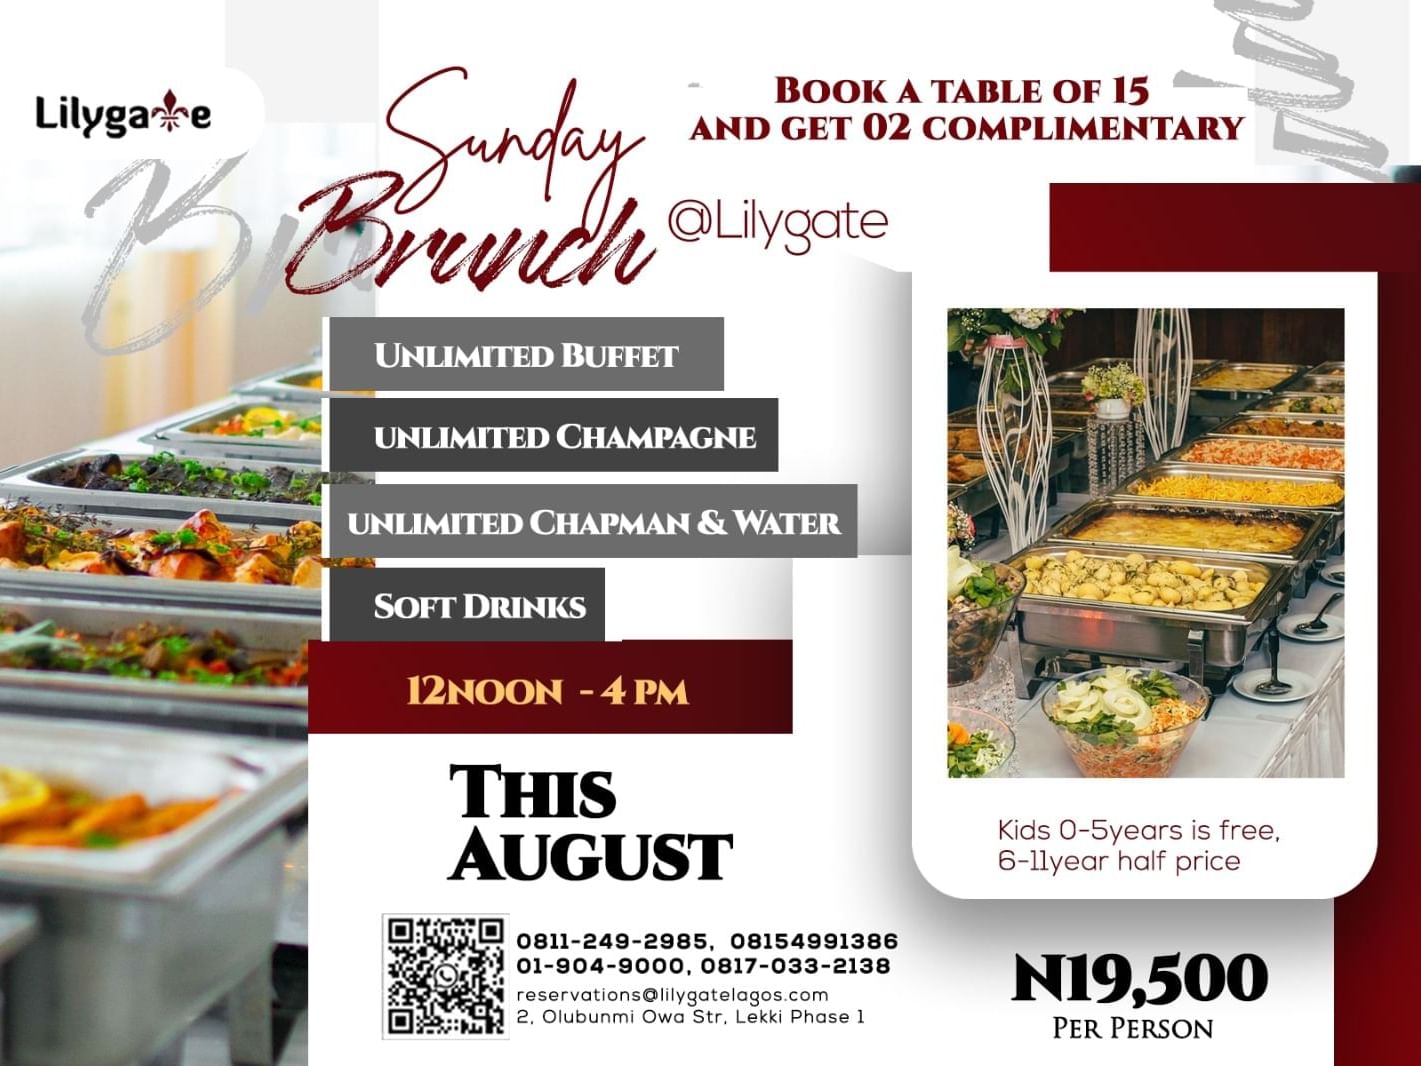 Sunday Brunch with Unlimited buffet, champagne, and soft drinks Book a table of 15 and get 2 complimentary seats 12noon - 4pm